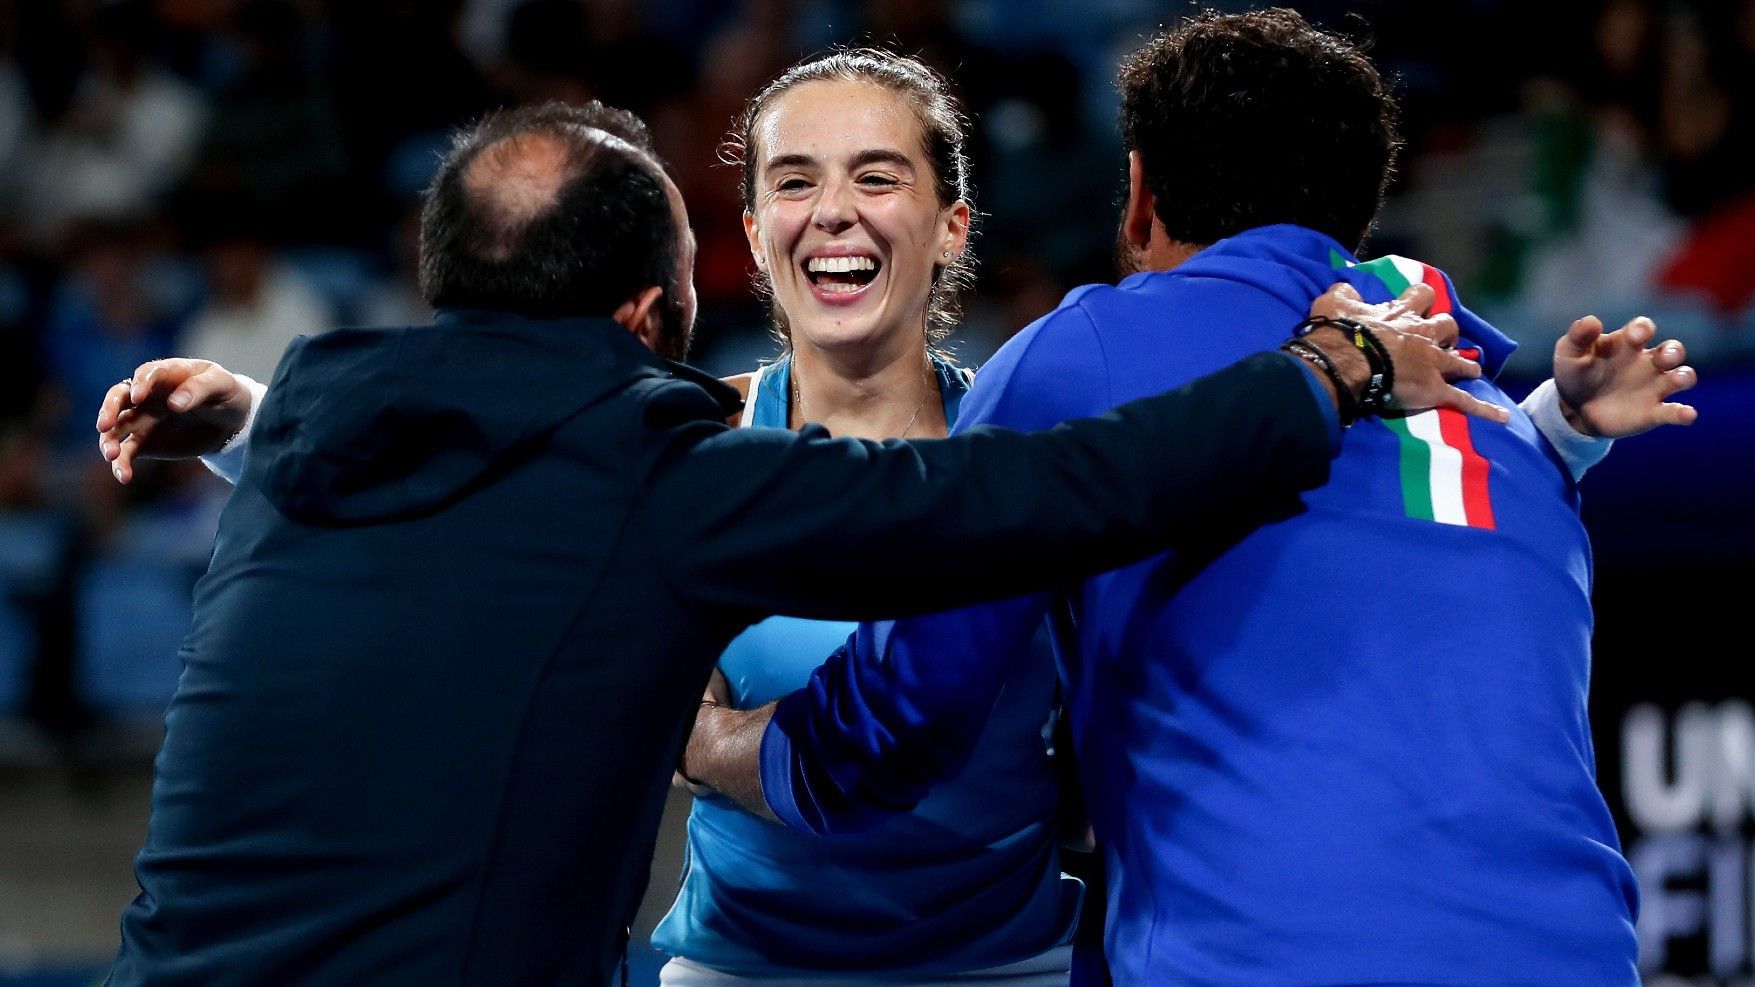 'I'm proud of myself': Lucia Bronzetti completes United Cup triumph for Italy over Greece